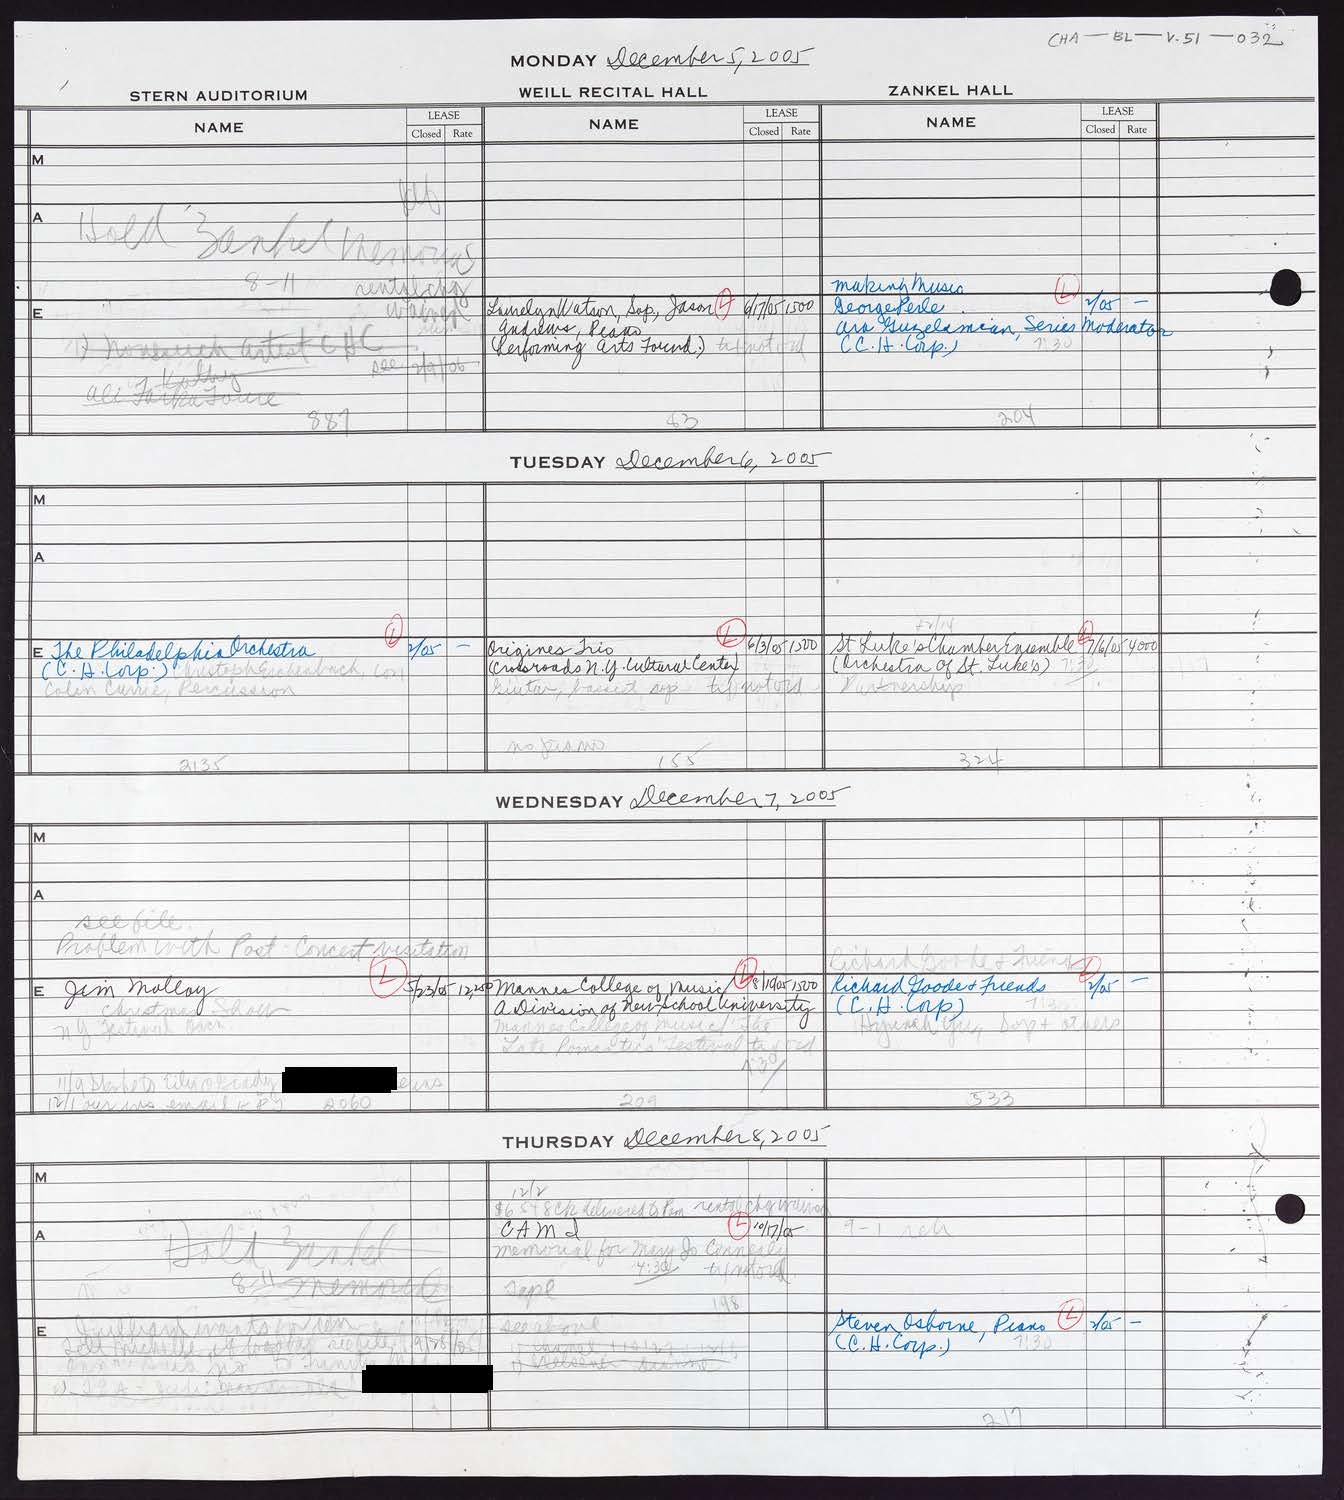 Carnegie Hall Booking Ledger, volume 51, page 32